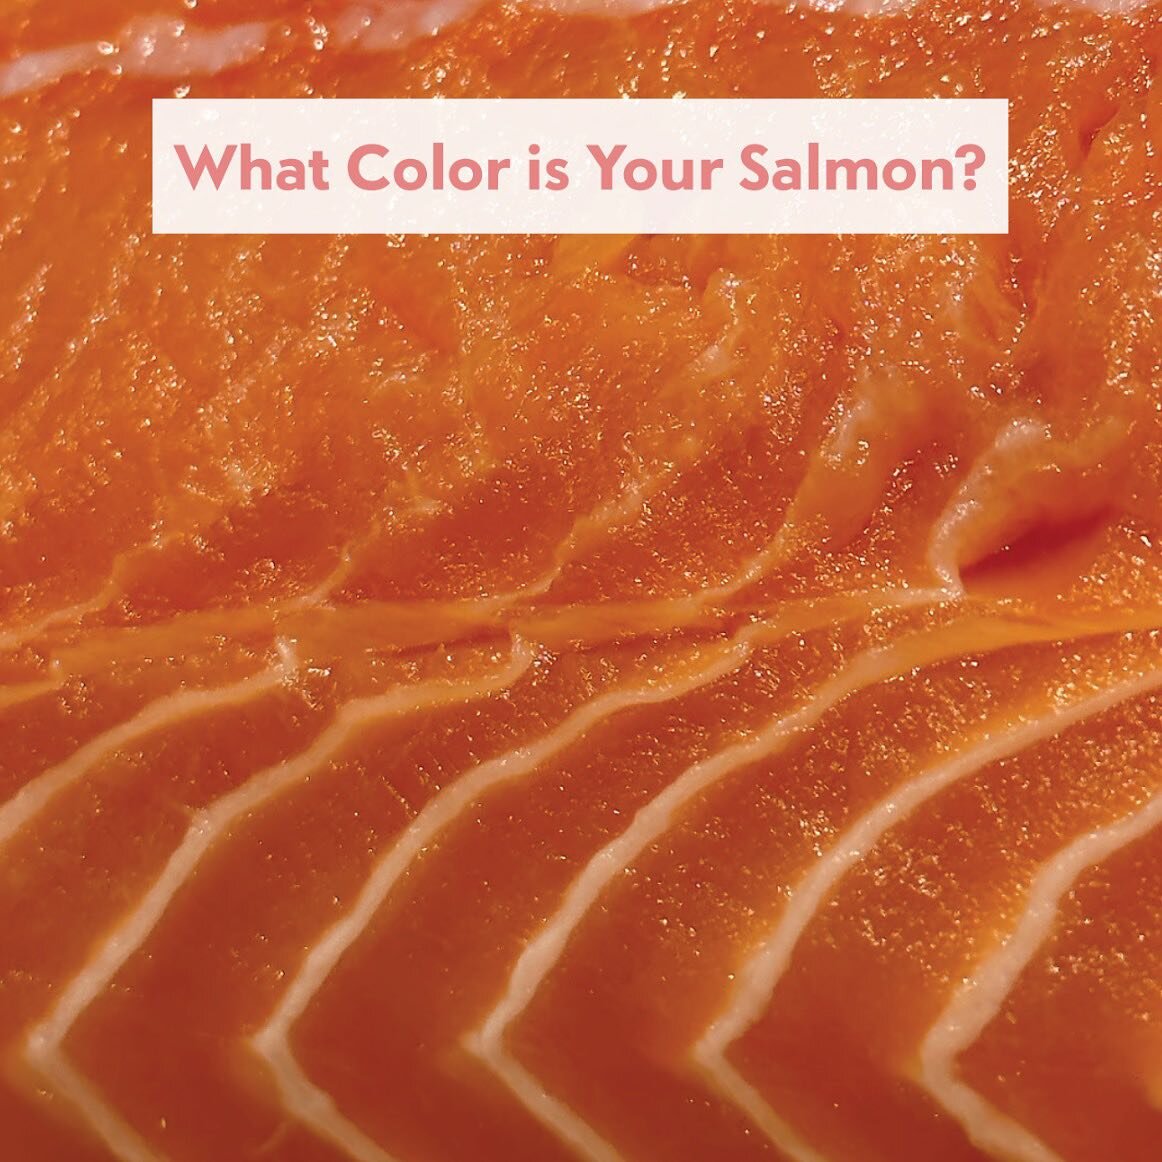 Did you know farmed salmon is dyed? My new artist&rsquo;s book &ldquo;What Color Is Your Salmon&rdquo; published by @publicationstudio premieres this weekend at the fourth annual book fair &ldquo;Press Play&rdquo; organized by @pioneerworks. The even